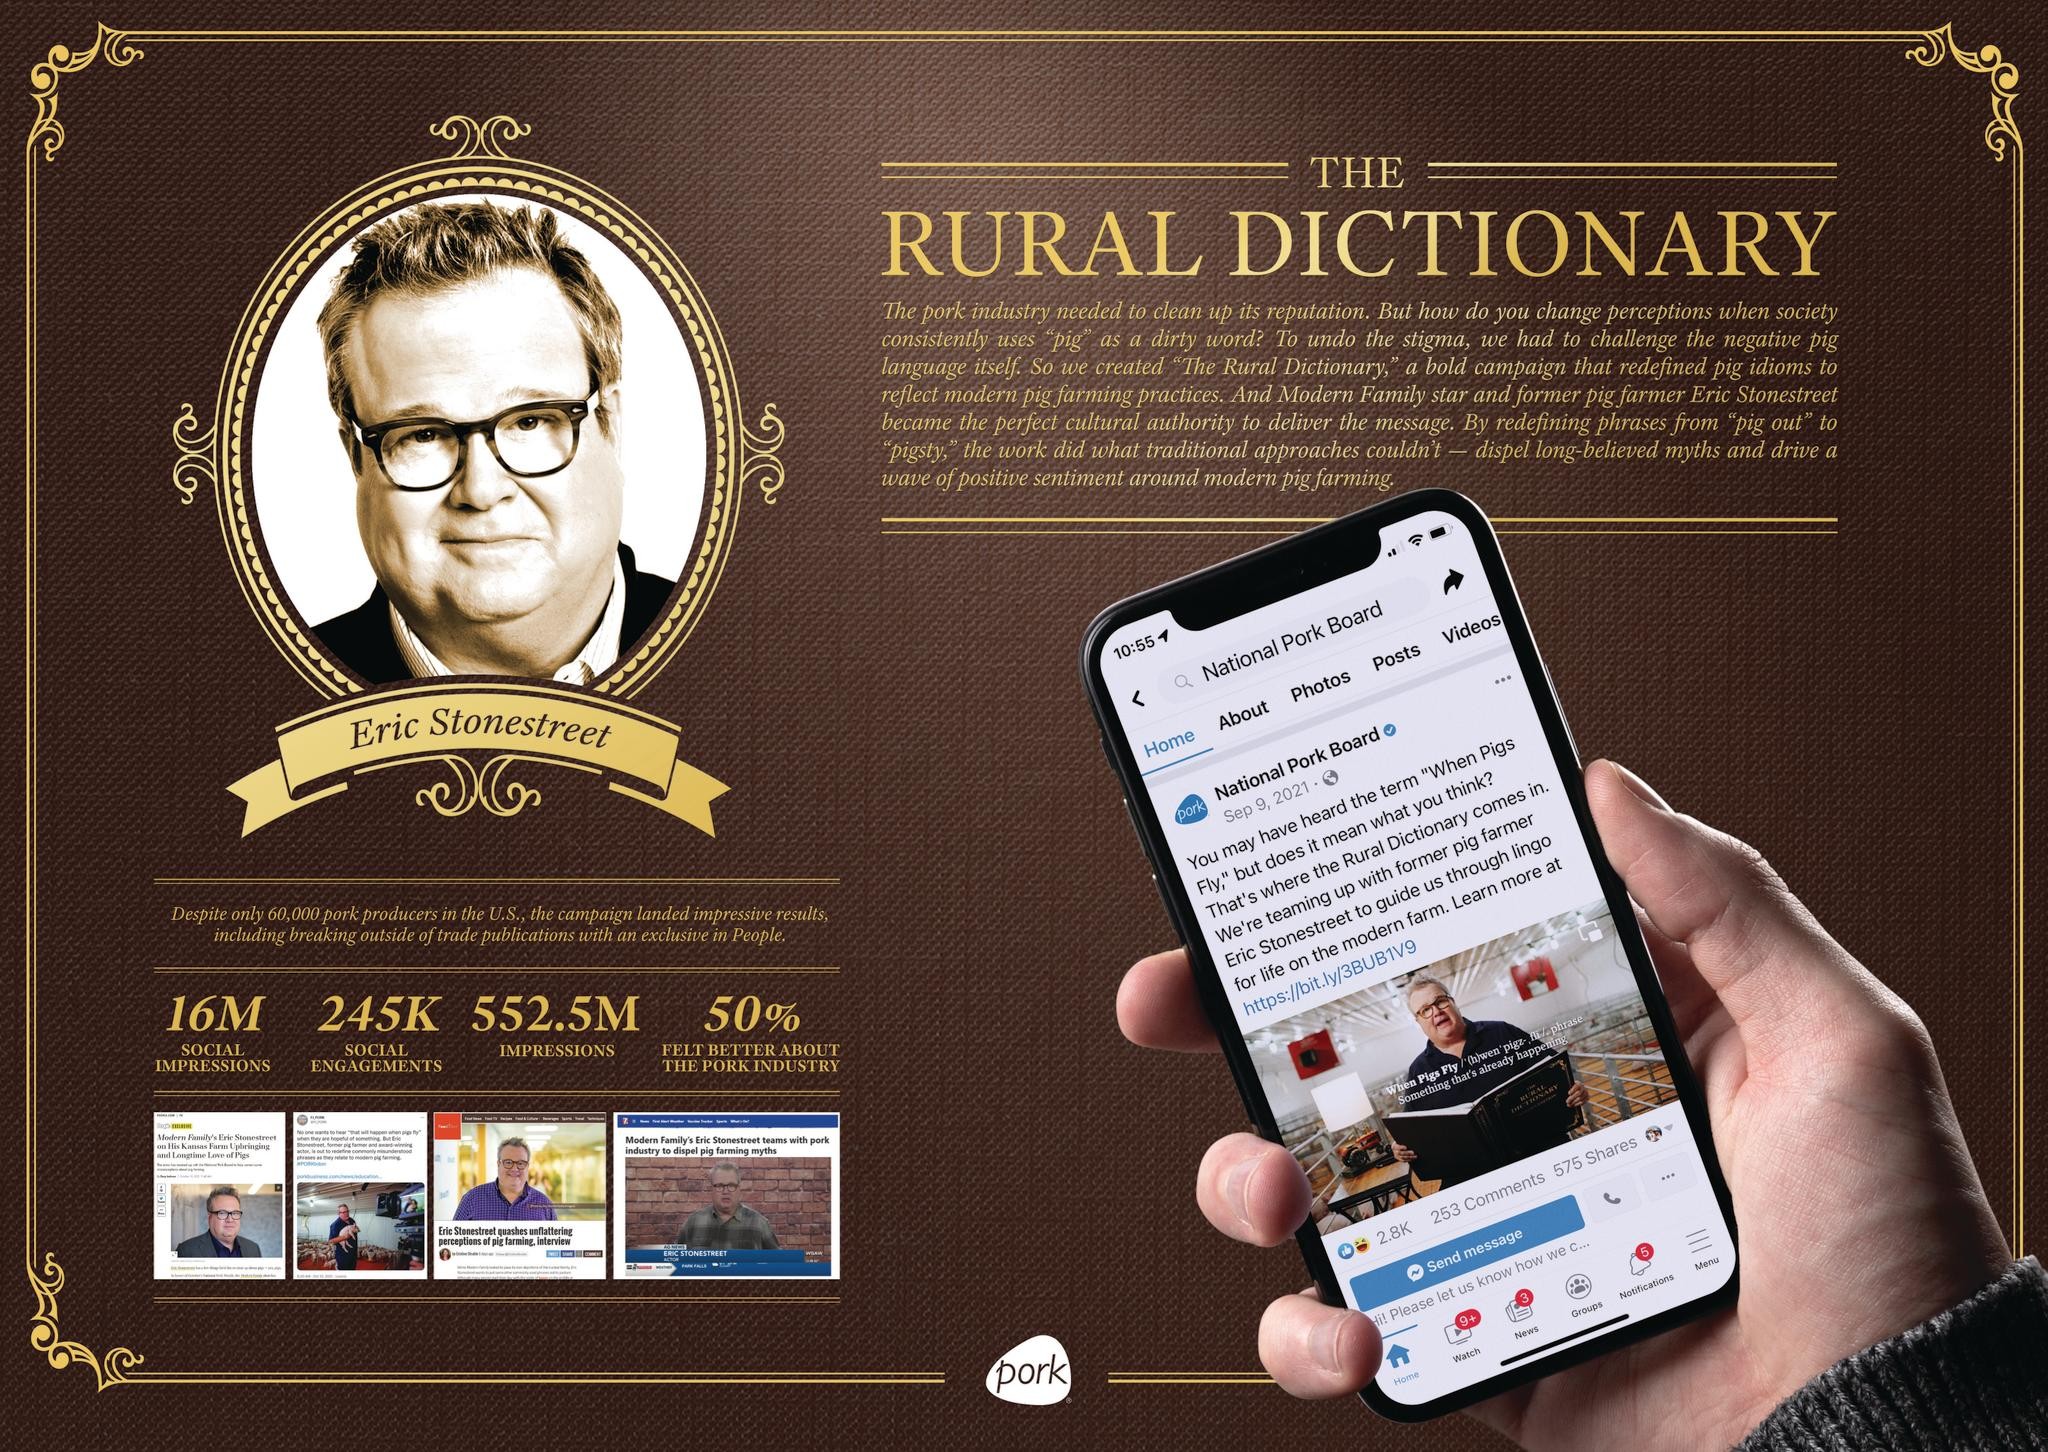 National Pork Board: The Rural Dictionary